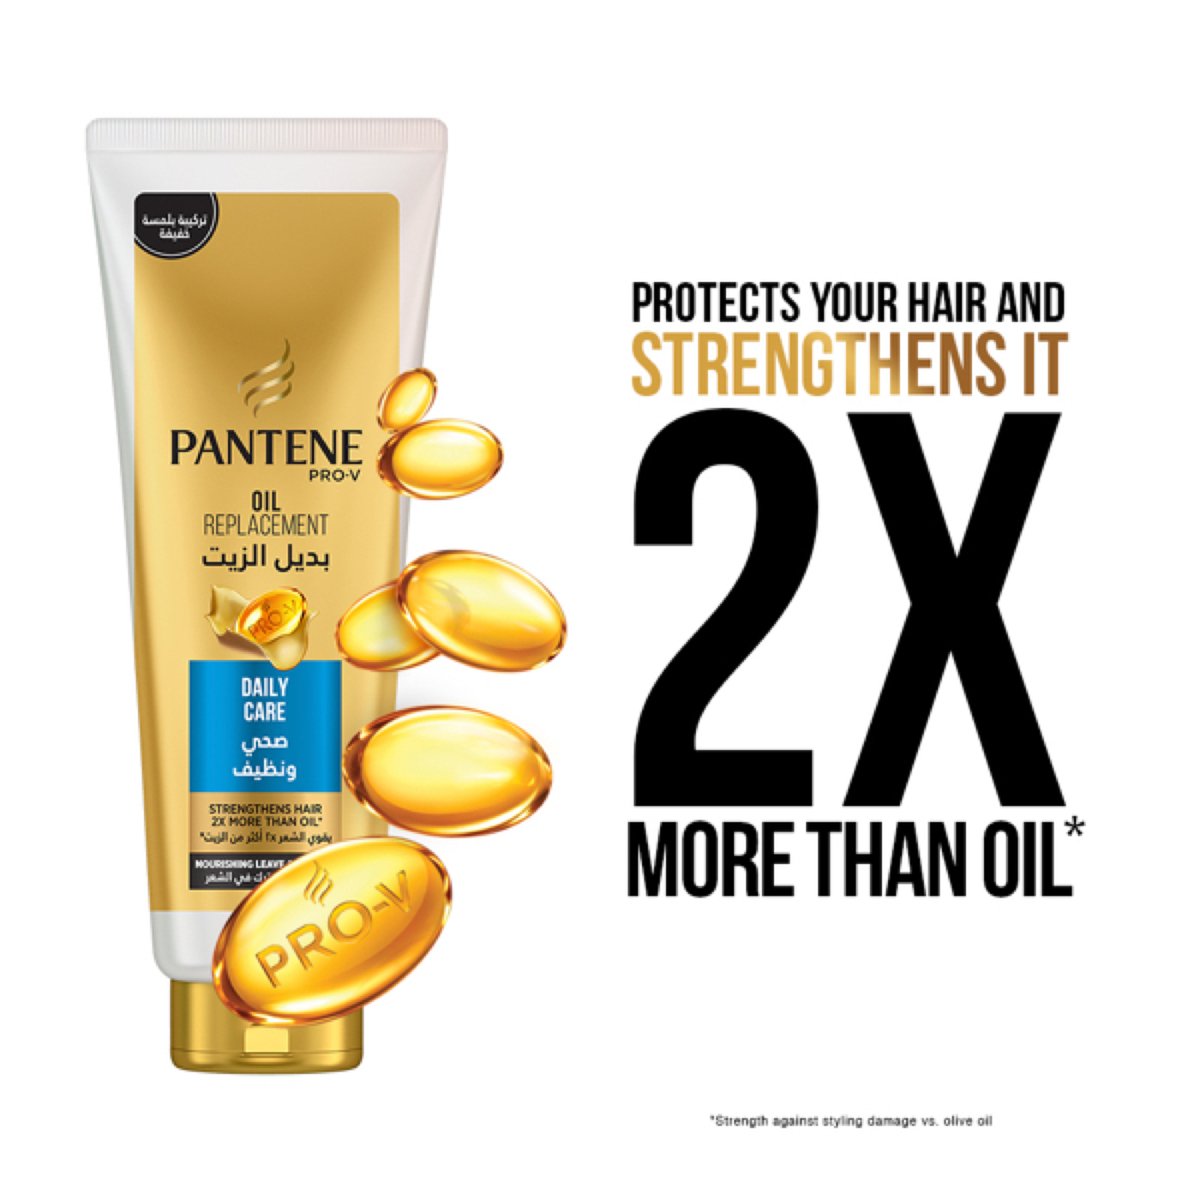 Pantene Pro-V Daily Care Oil Replacement 350 ml